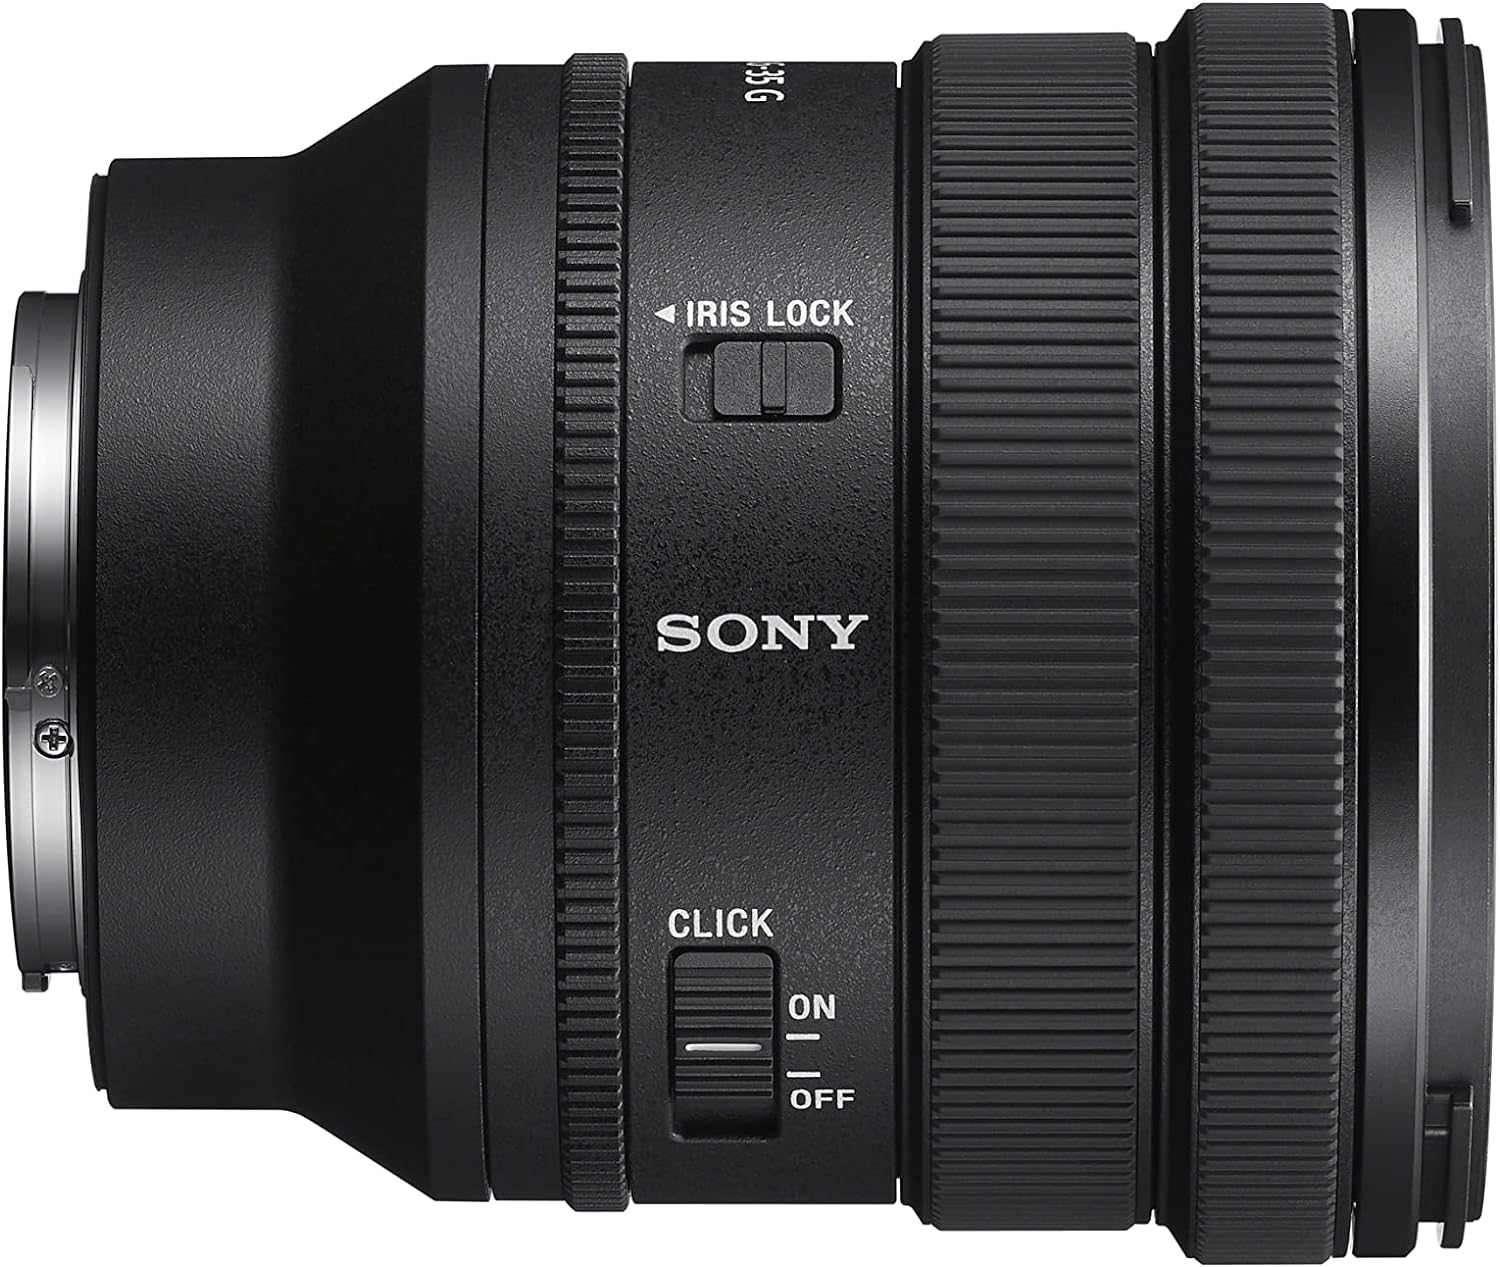 Sony FE PZ 16-35mm F4 G - Full-Frame Constant-Aperture Wide-Angle Power Zoom G Lens